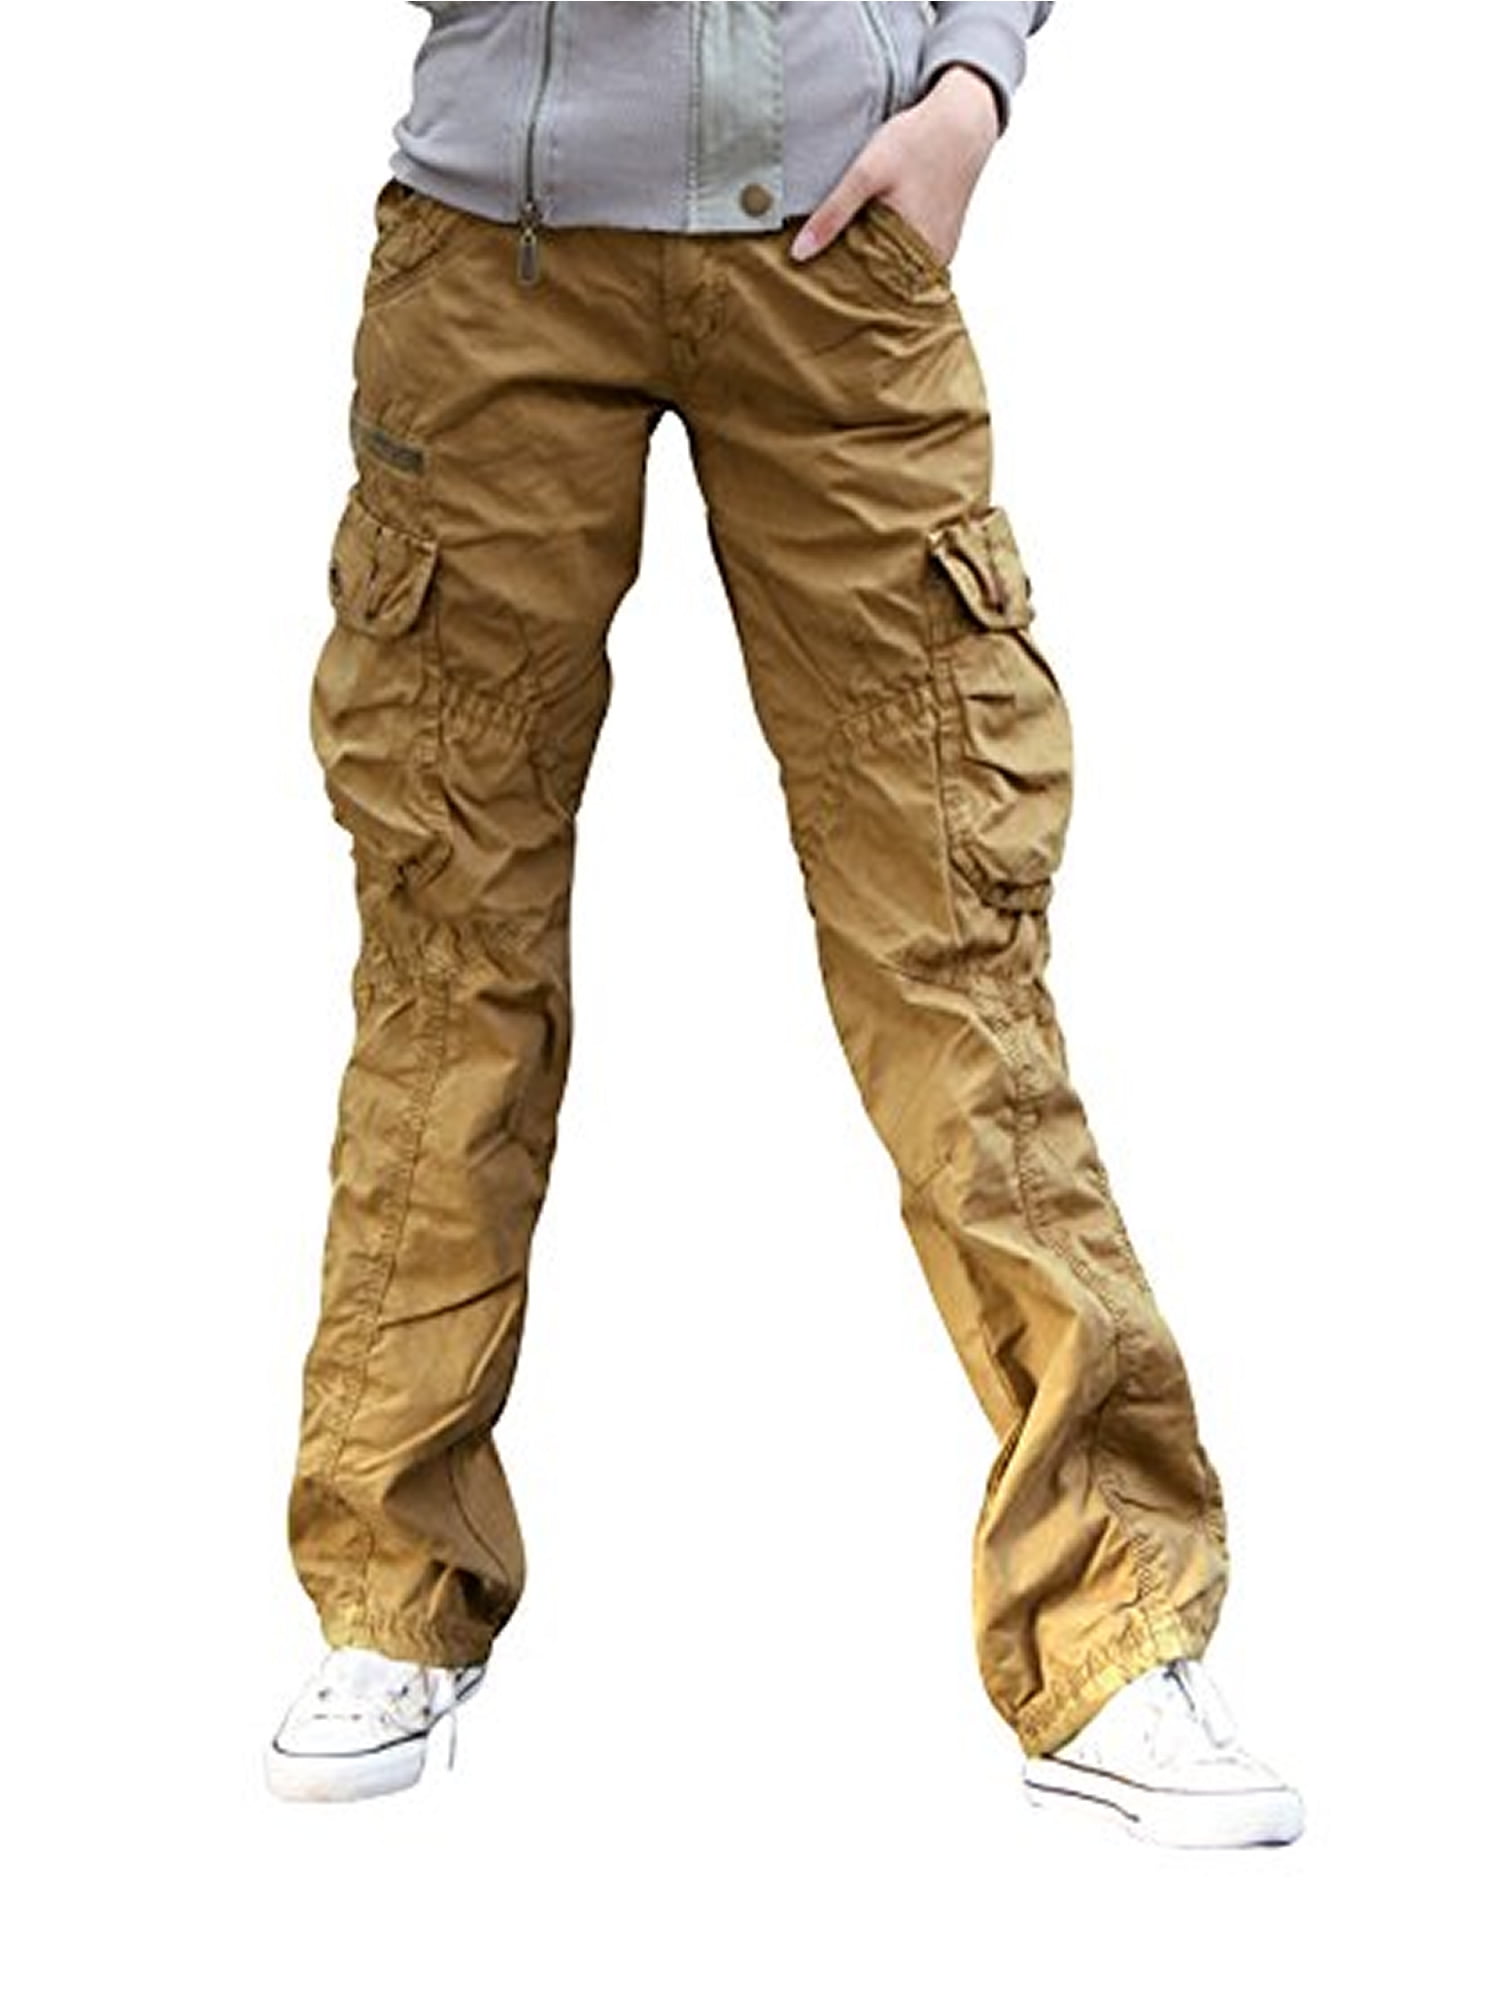 Women's Casual Cargo Pants Solid Cotton Military Army Styles Trousers ...